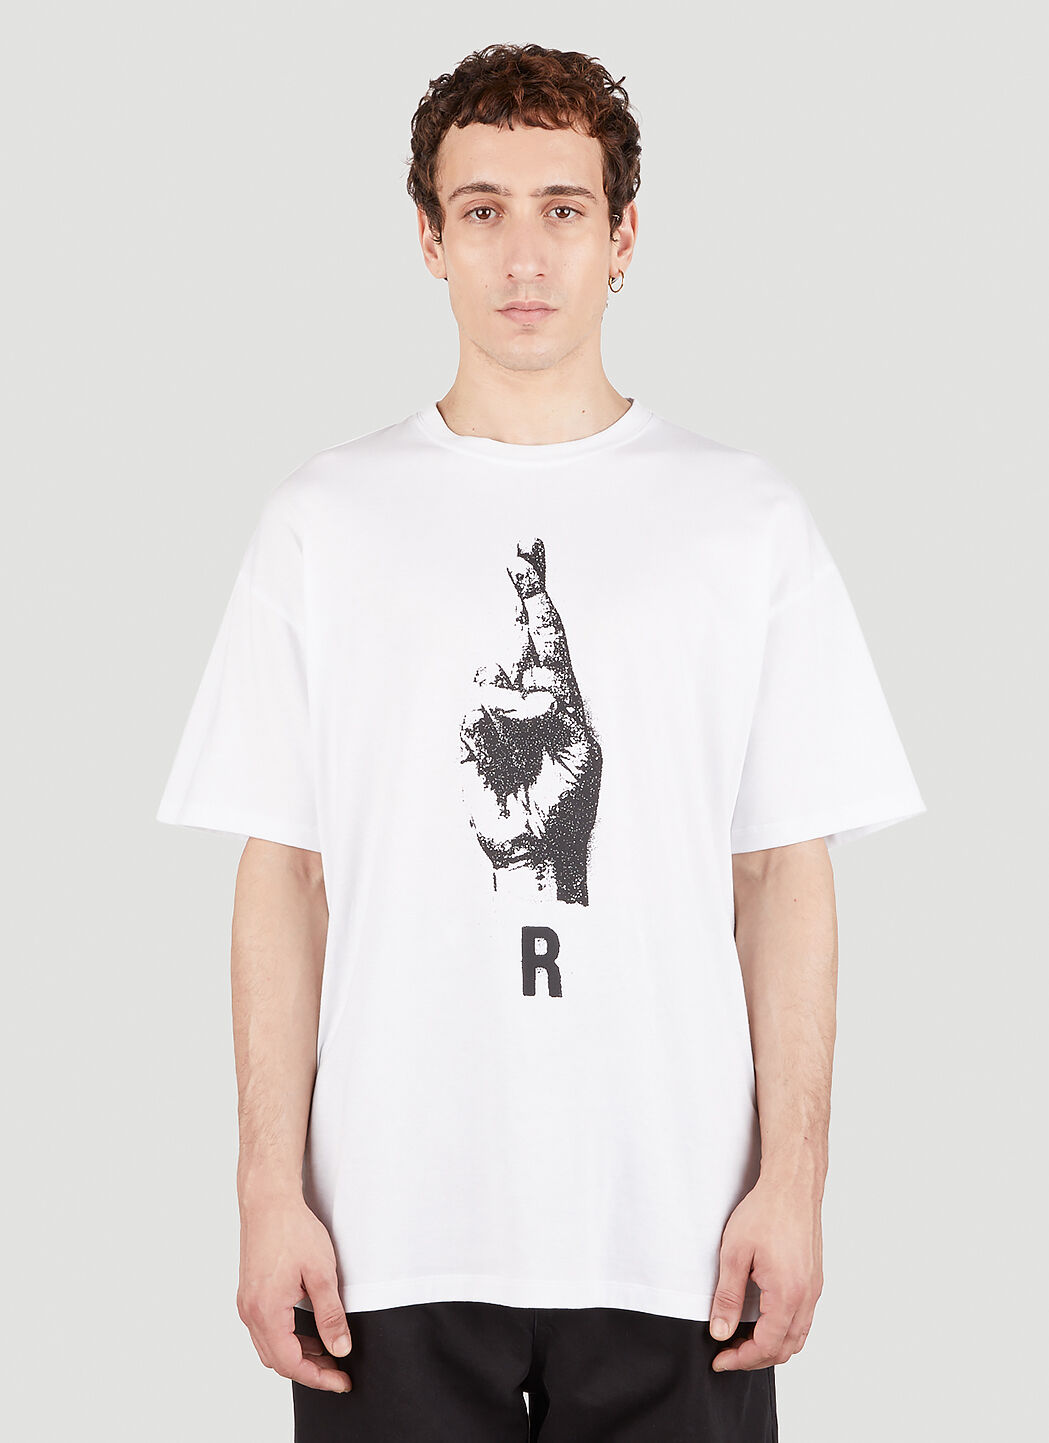 Raf Simons x Fred Perry 图案印花 T 恤 黑色 rsf0152002